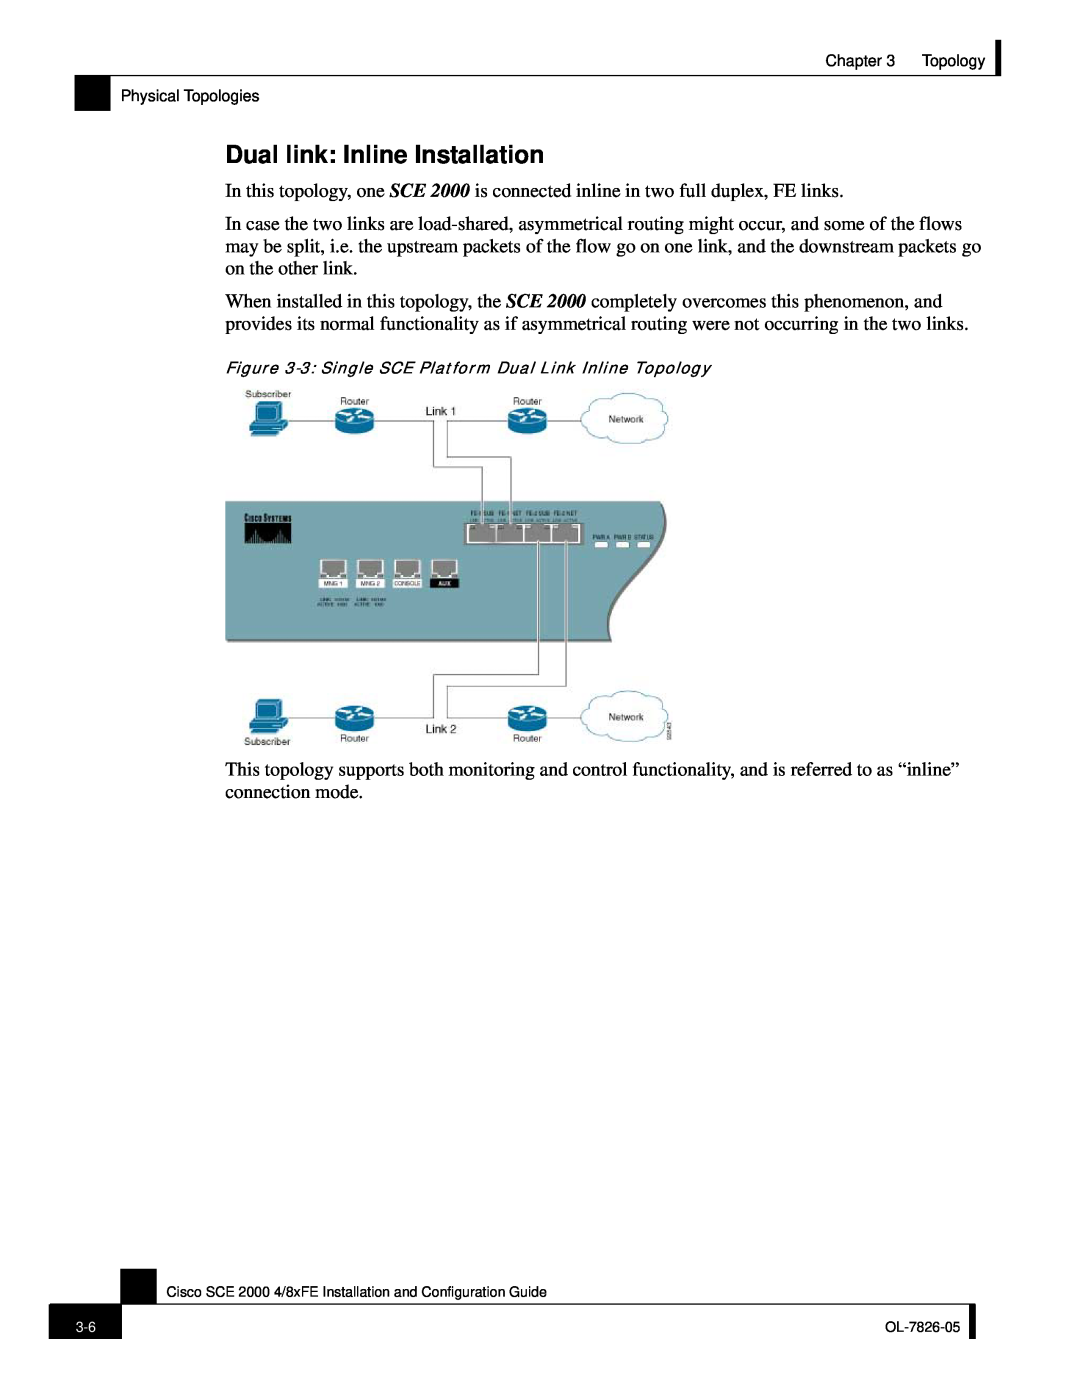 Cisco Systems SCE 2000 4/8xFE manual Dual link Inline Installation, 3 Single SCE Platform Dual Link Inline Topology 